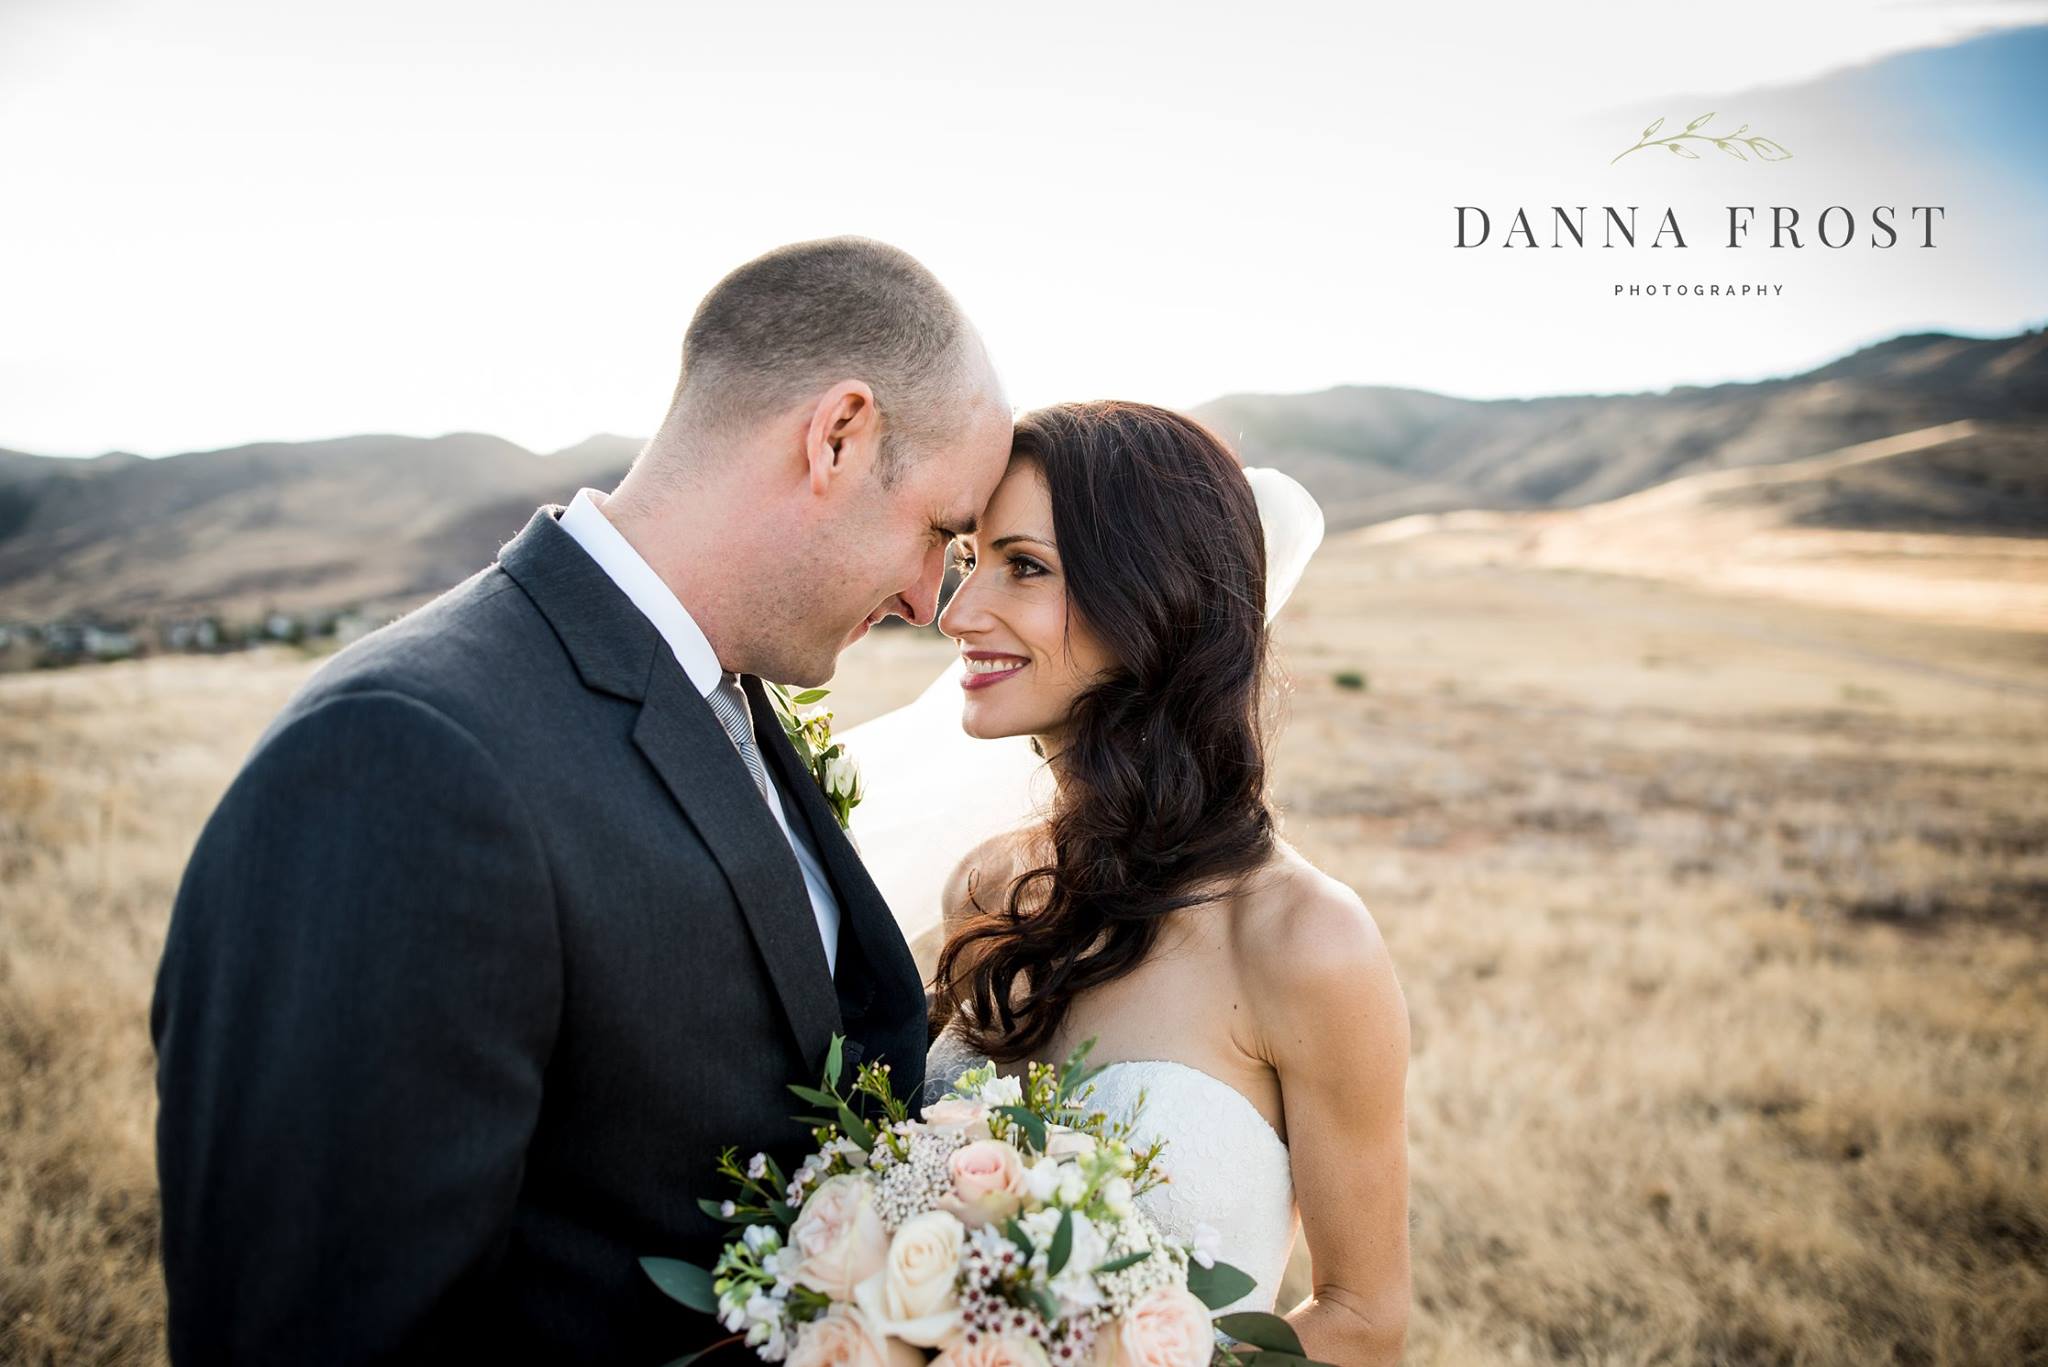 Danna Frost Photography